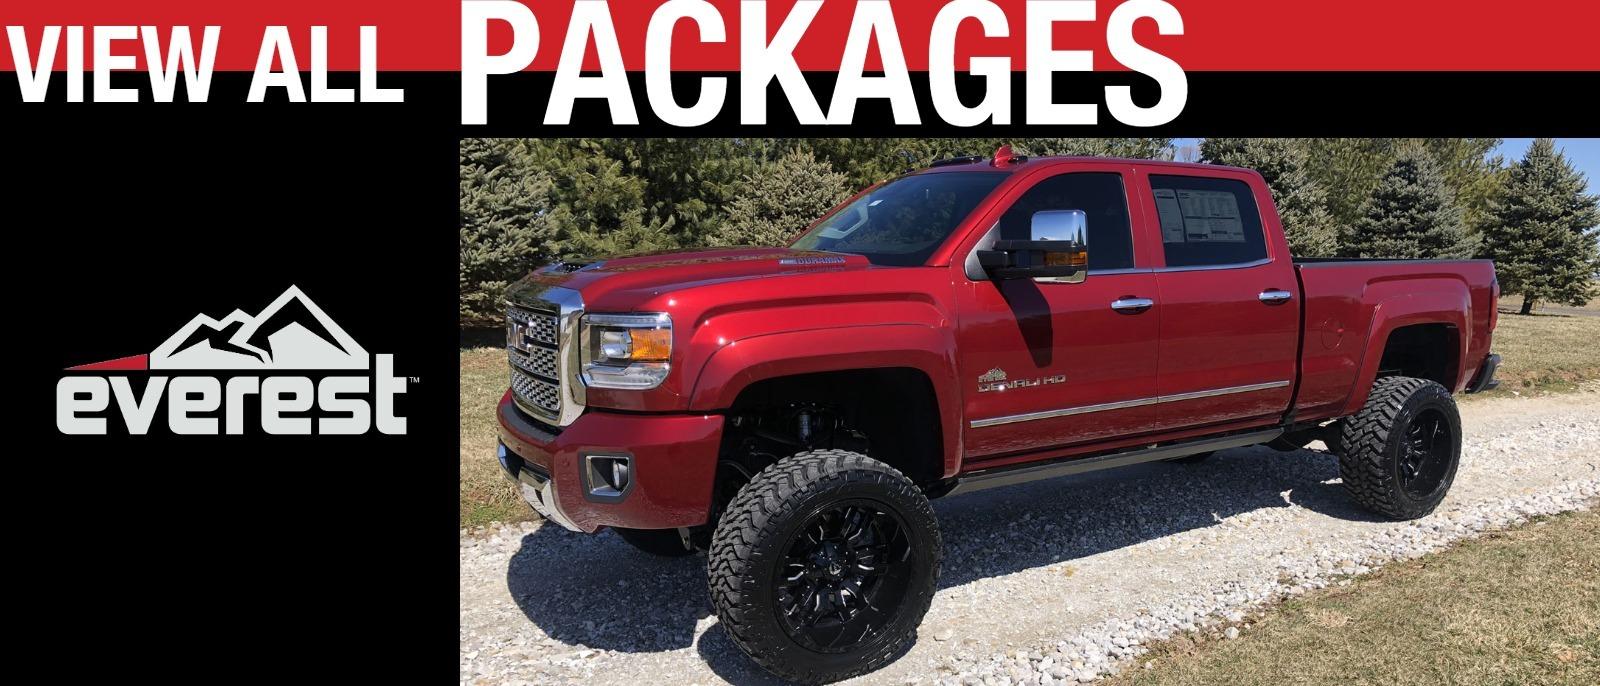 Everest Lifted Trucks 2500 Denali HD Wheels Tires. View all packages.